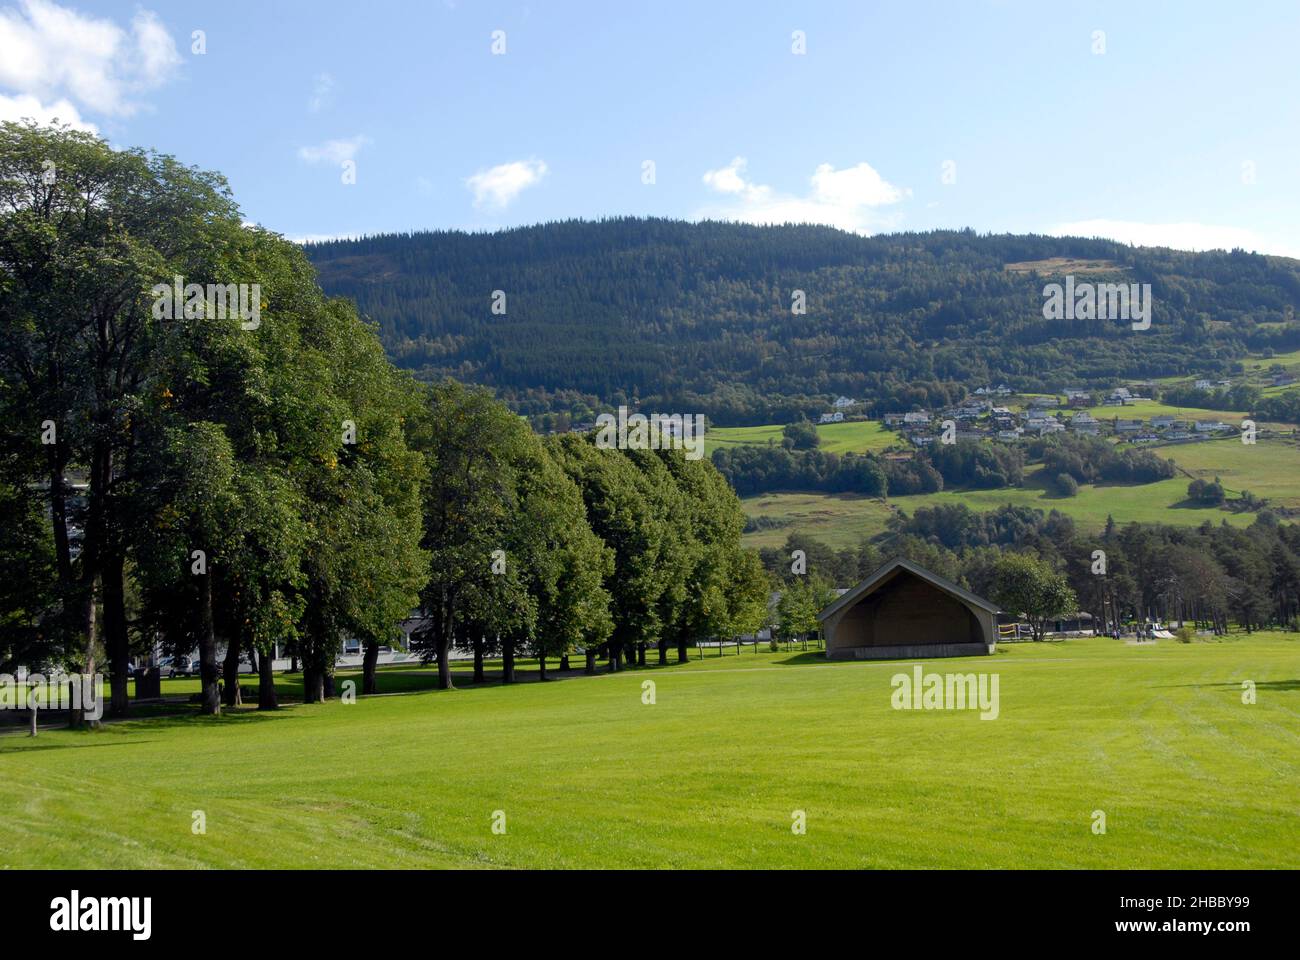 Attractive grassy open area with small building and line of trees to one side and mountains beyond, Norway Stock Photo